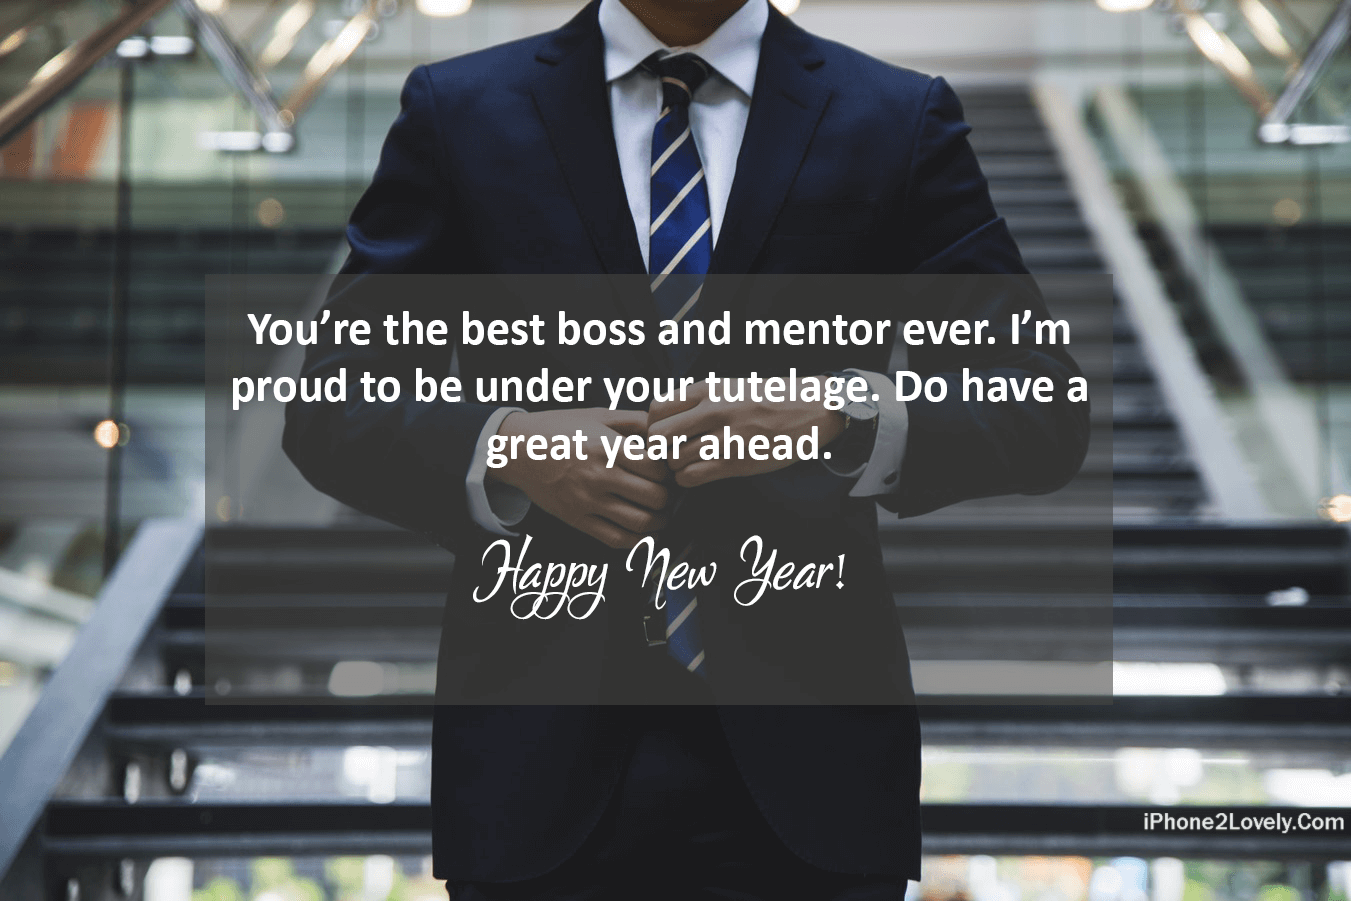 Best Mentor And Boss New Year Wishes 2019